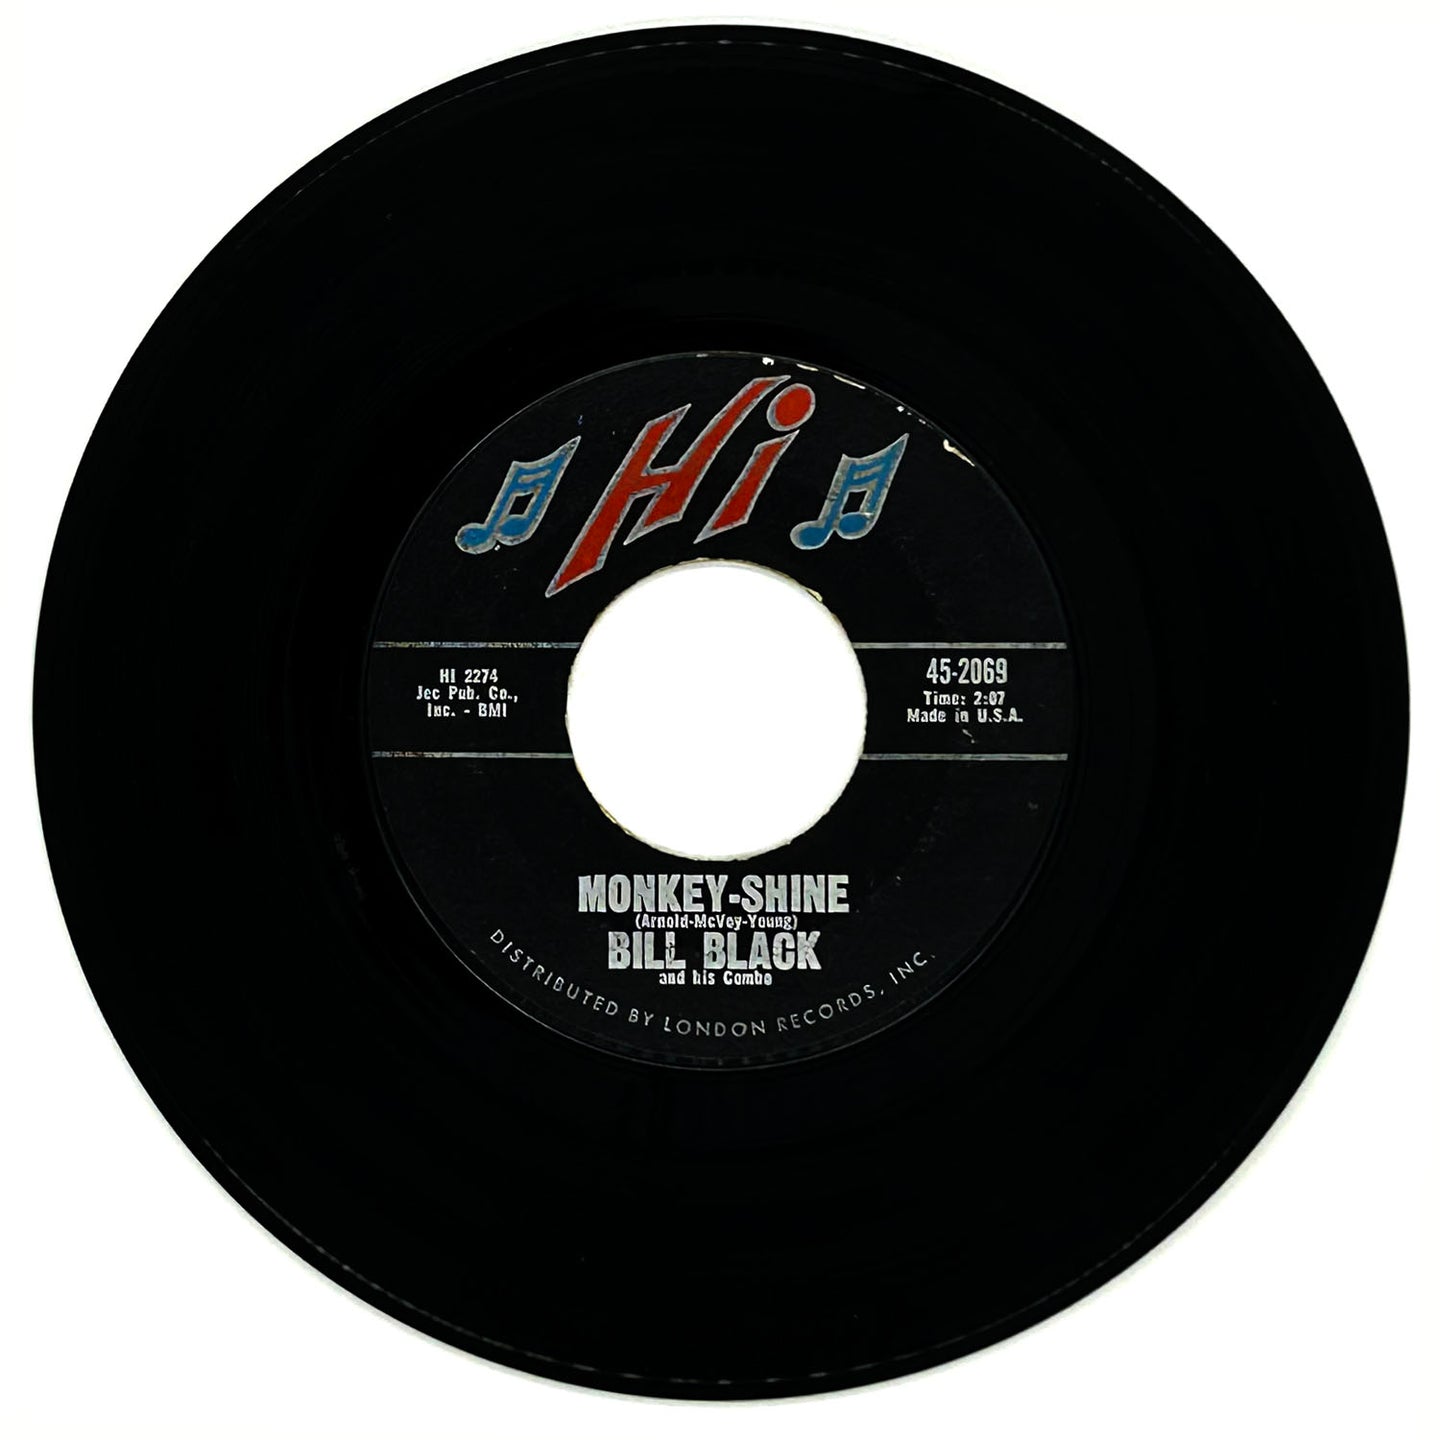 Bill Black and His Combo : MONKEY-SHINE/ LONG GONE